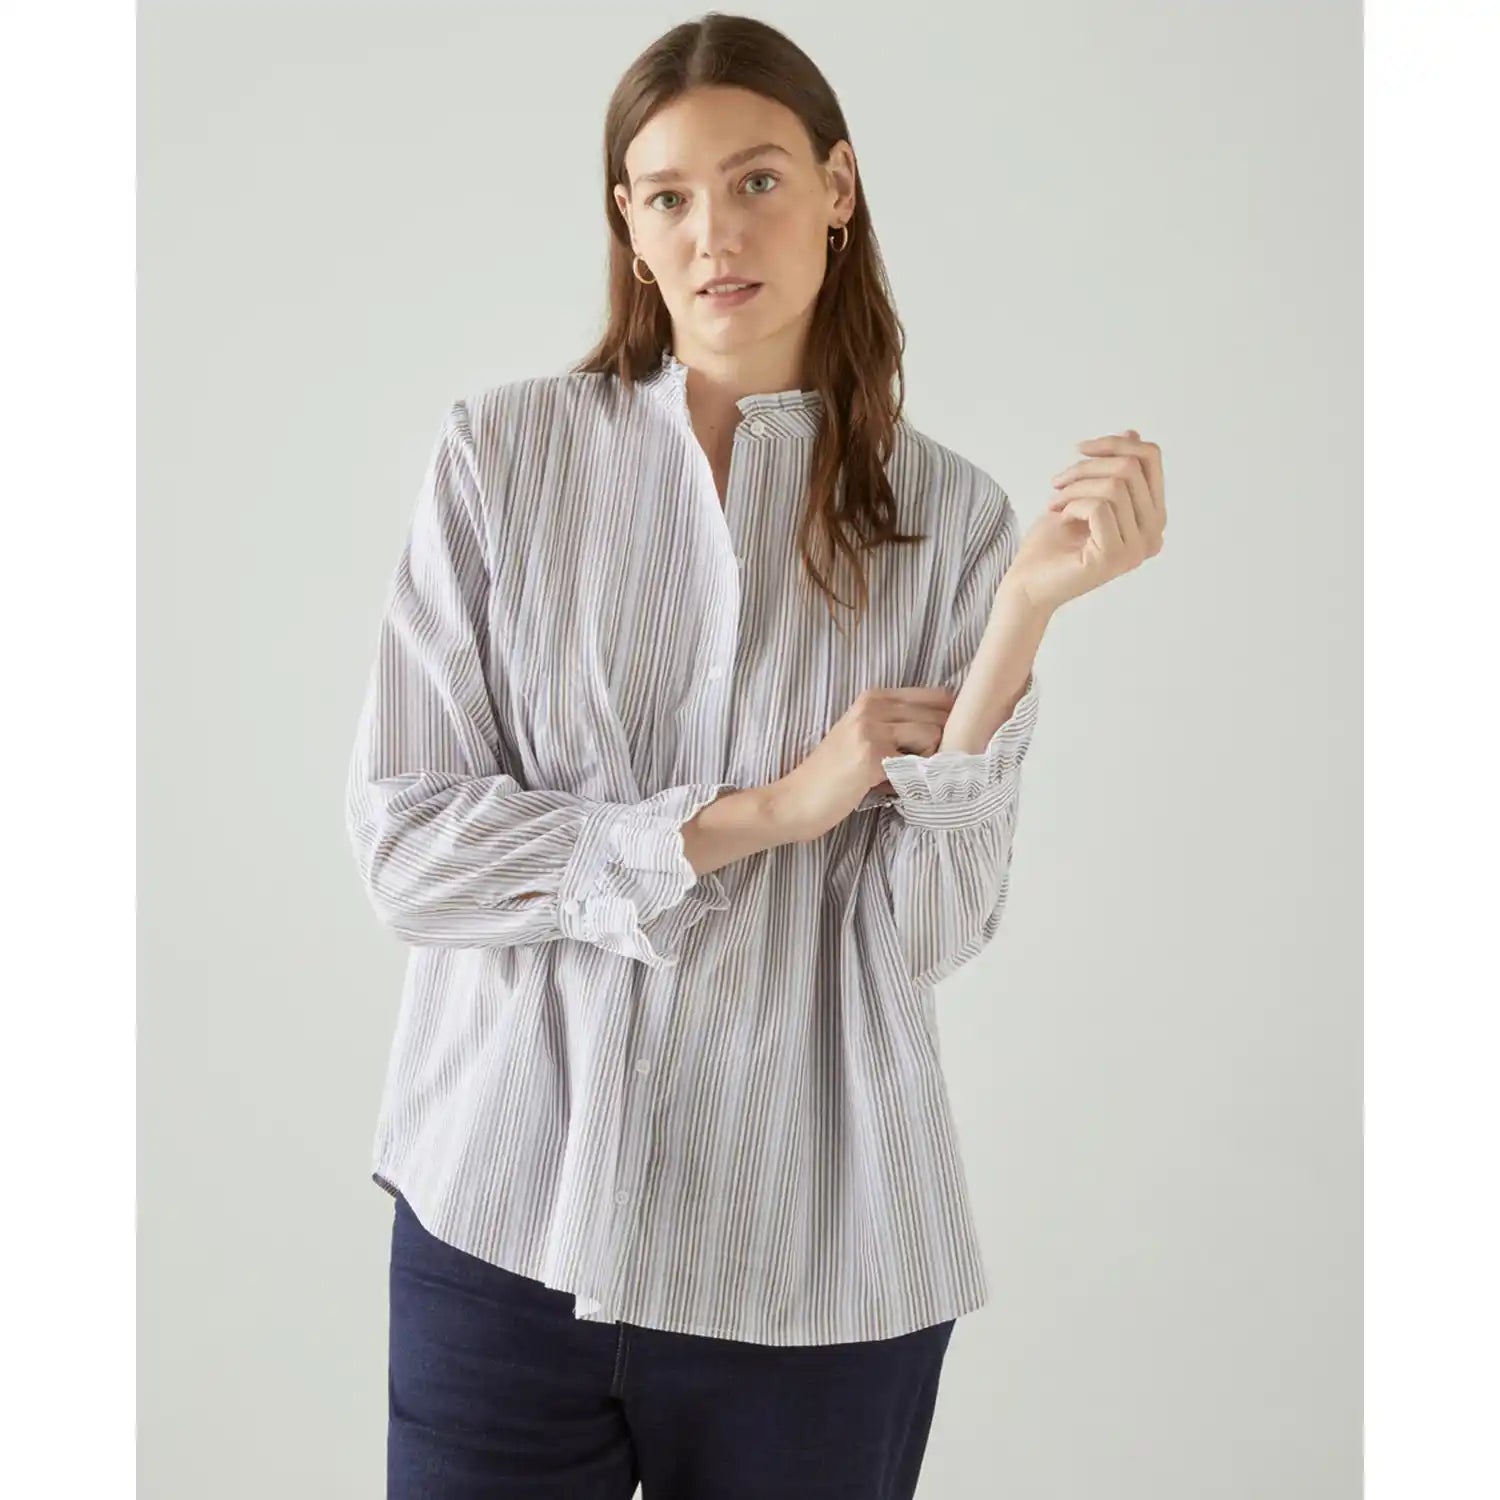 Couchel Striped Blouse With Ruffle Neck 1 Shaws Department Stores